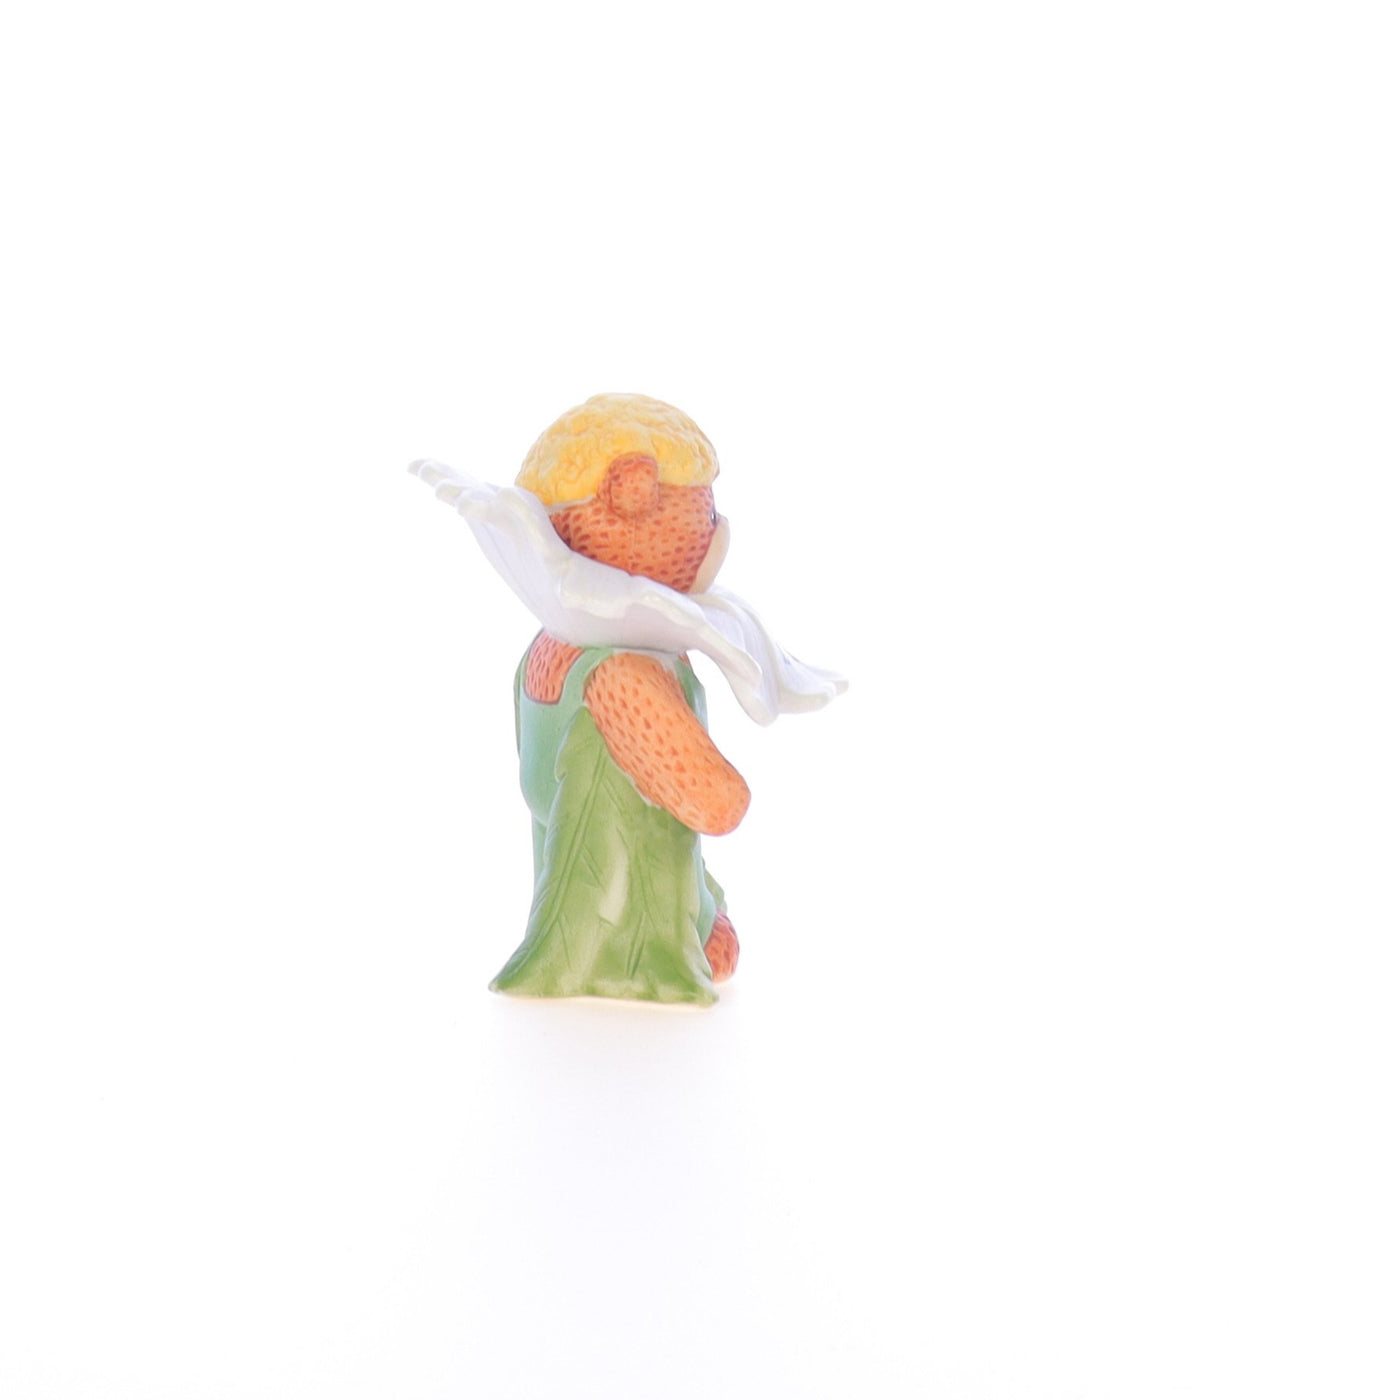 Lucy_And_Me_by_Lucy_Atwell_Porcelain_Figurine_1989_Flower_Petals_Lucy_Unknown_004_07